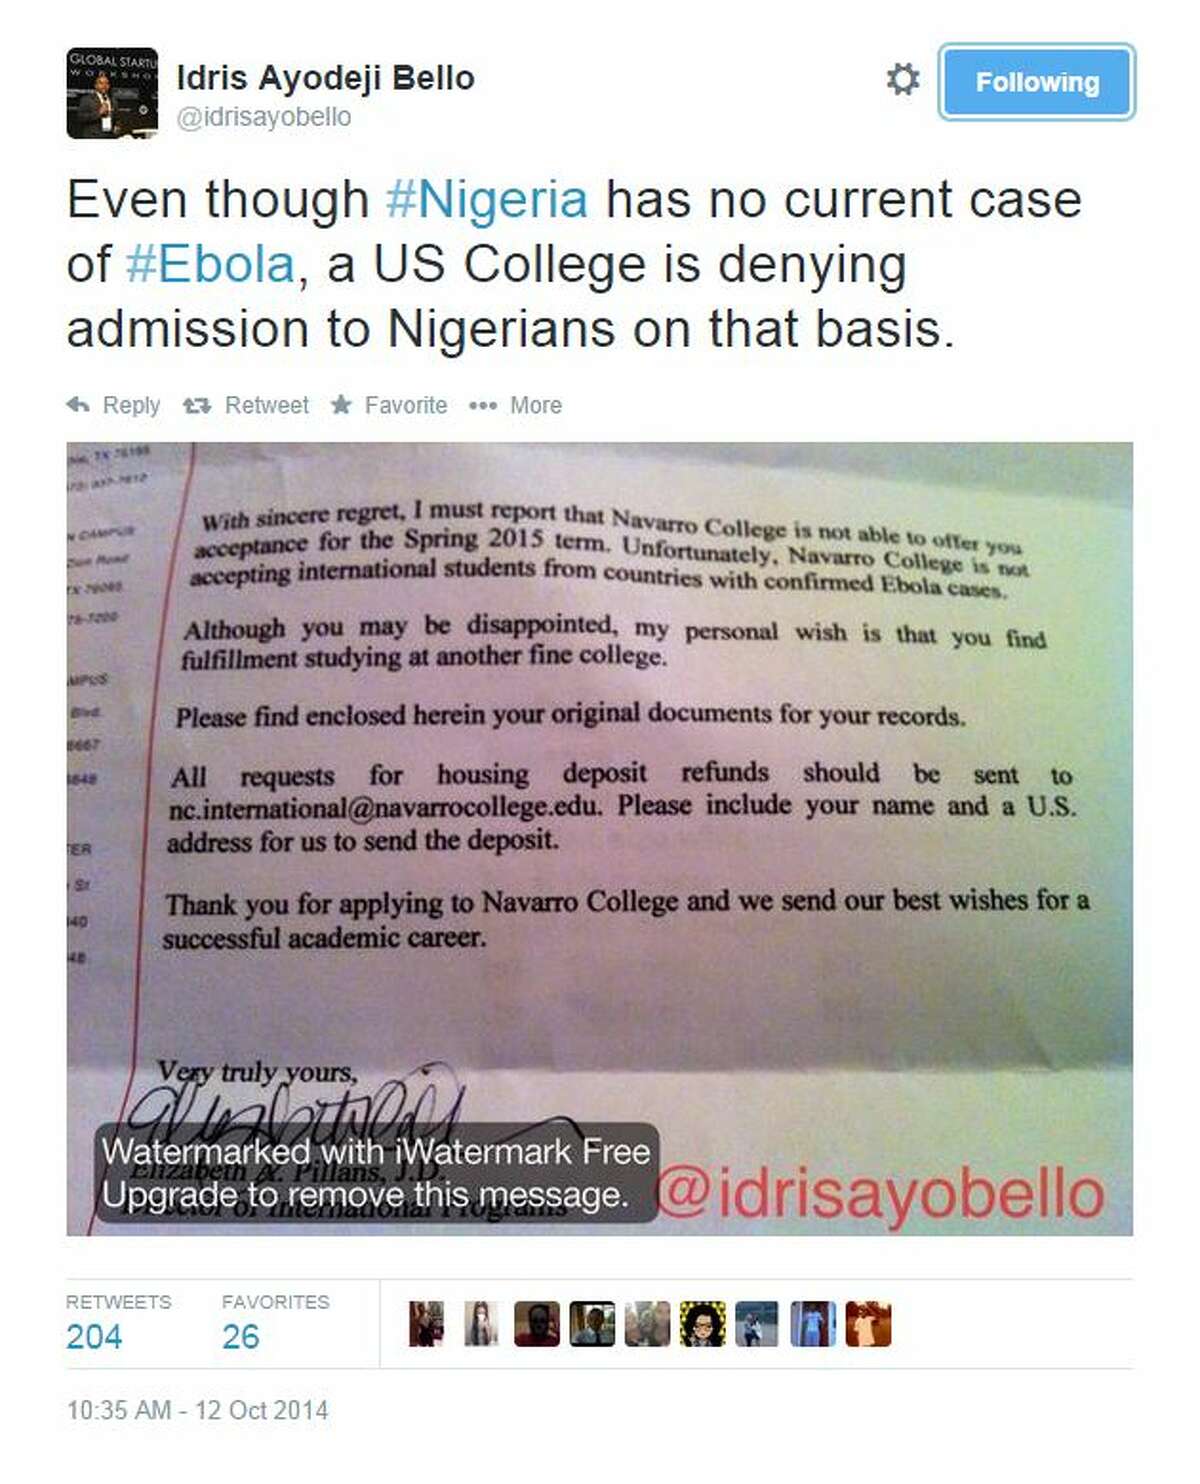 A Texas college is denying admission to applicants from countries with confirmed Ebola cases, even if those nations have no current cases of the dreaded disease. Idris Ayodeji Bello, an advocate for Africans in the United States, took to Twitter on Oct. 12 to circulate a letter from Navarro College in Corsicana telling applicants the college "is not accepting international students from countries with confirmed Ebola cases."